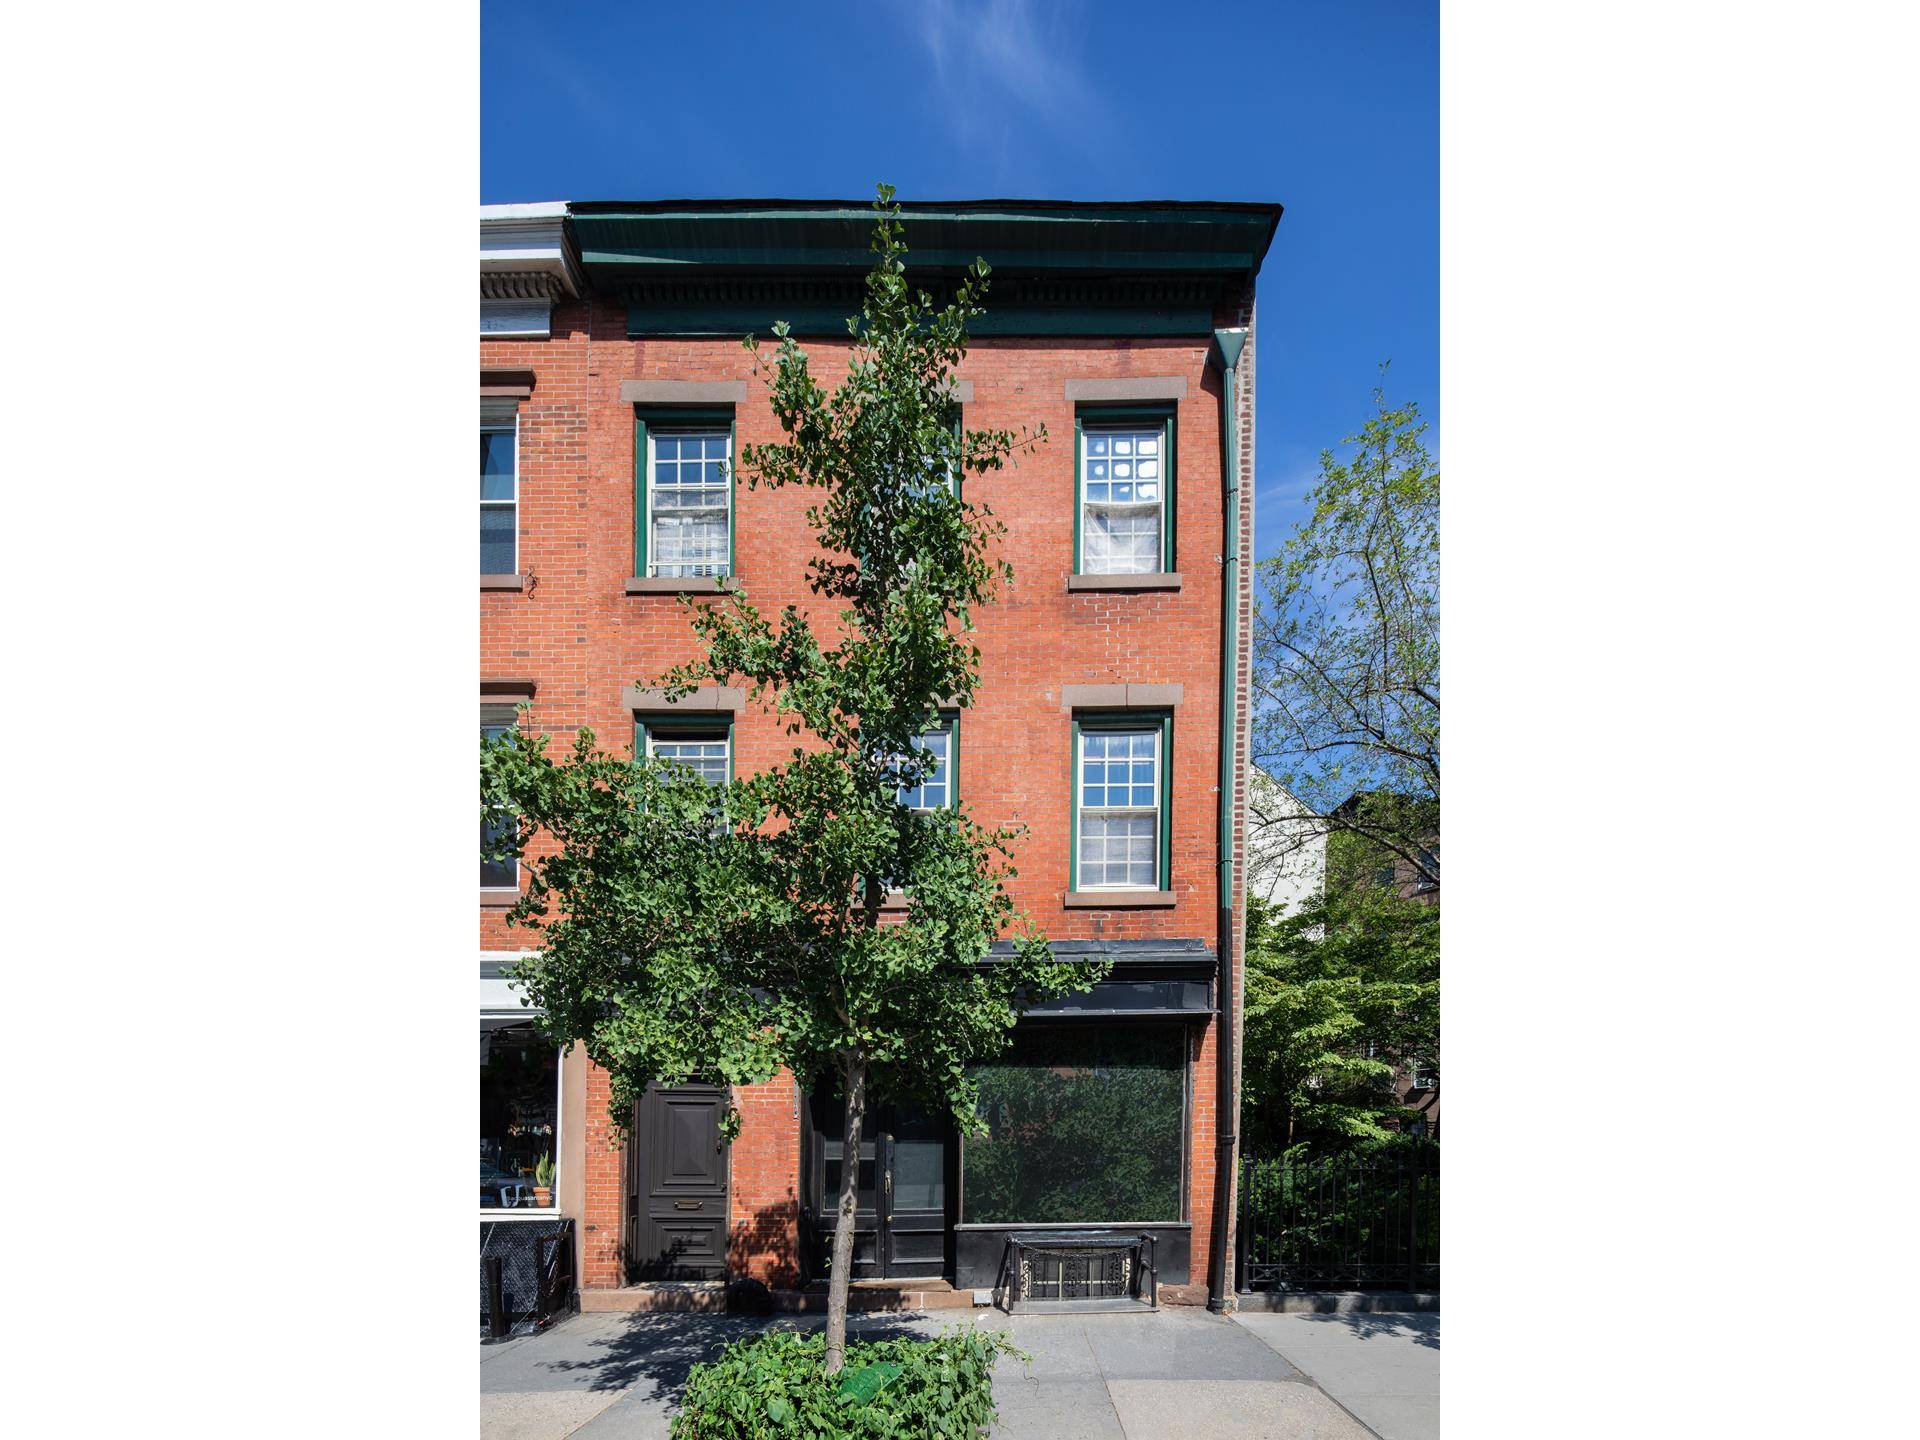 This 5 story, 20' x 30' classic Greek Revival West Village townhome located next door to the beautiful and well loved Jane Street Garden, to which you have a key, ...